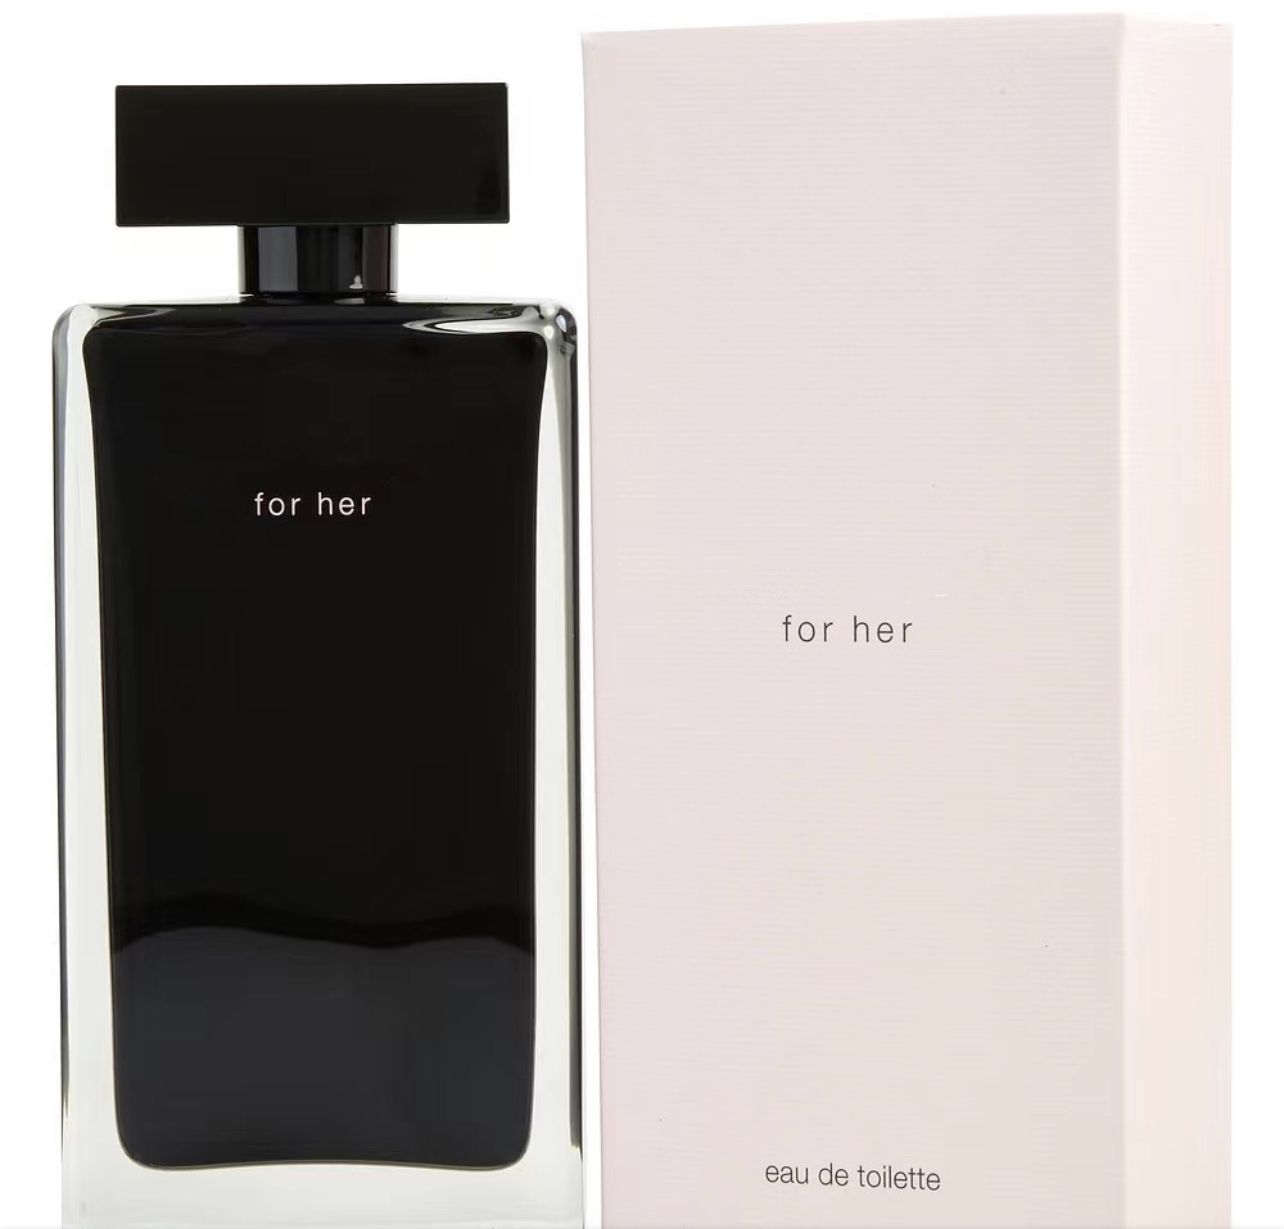 Narciso rodriguez narciso туалетная. Narciso Eau de Toilette Narciso Rodriguez. Narciso Rodriguez for her. Narciso Rodriguez Narciso EDT 90ml. Нарциссо Родригес for her.